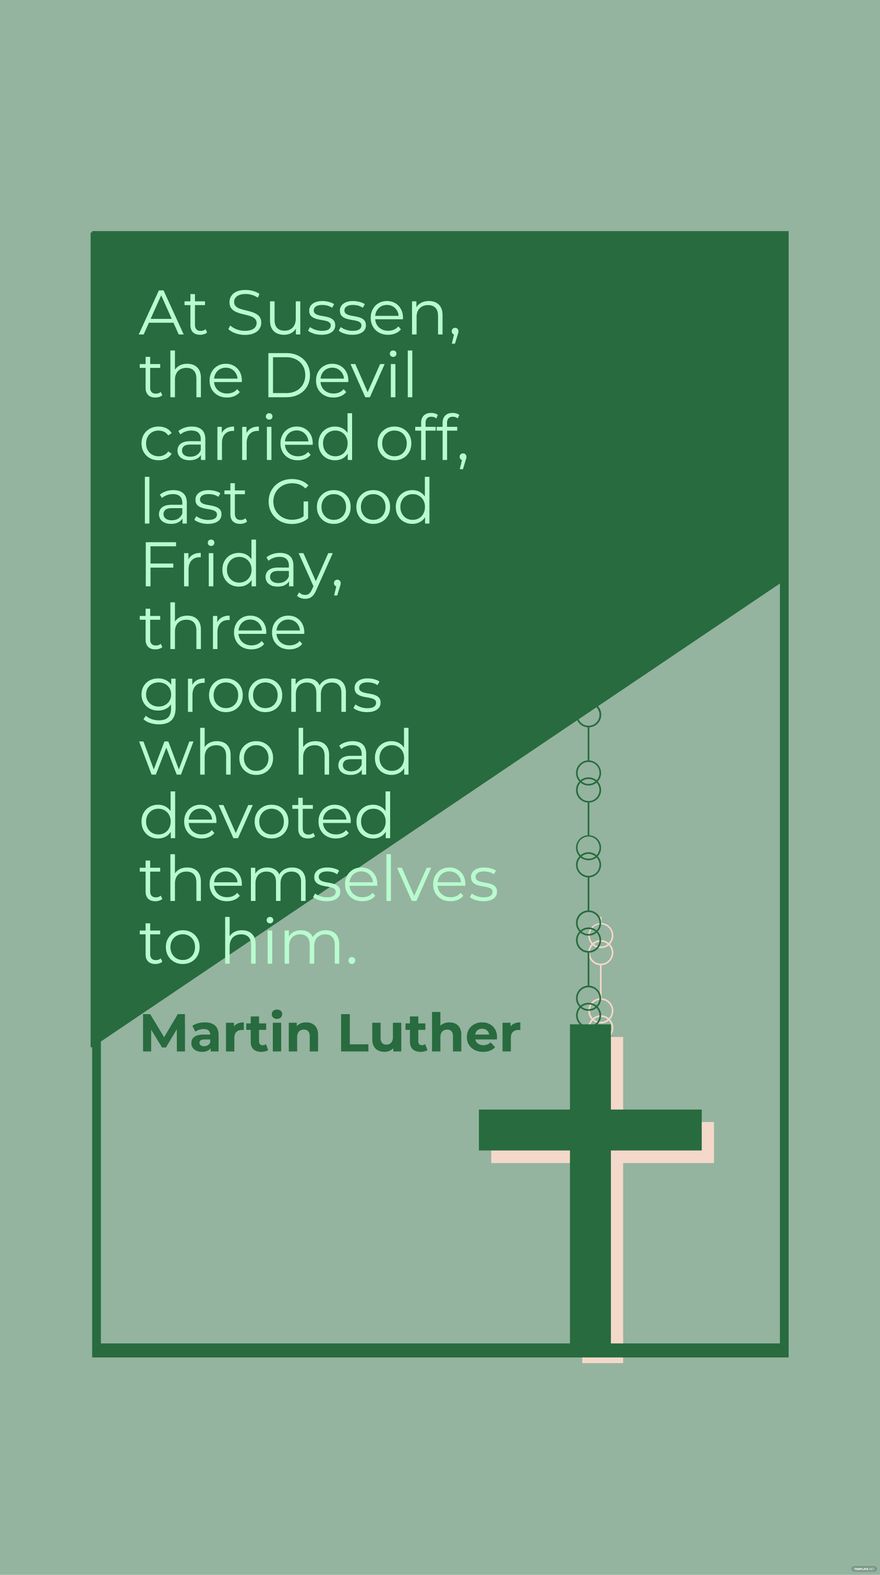 Free Martin Luther - At Sussen, the Devil carried off, last Good Friday, three grooms who had devoted themselves to him.